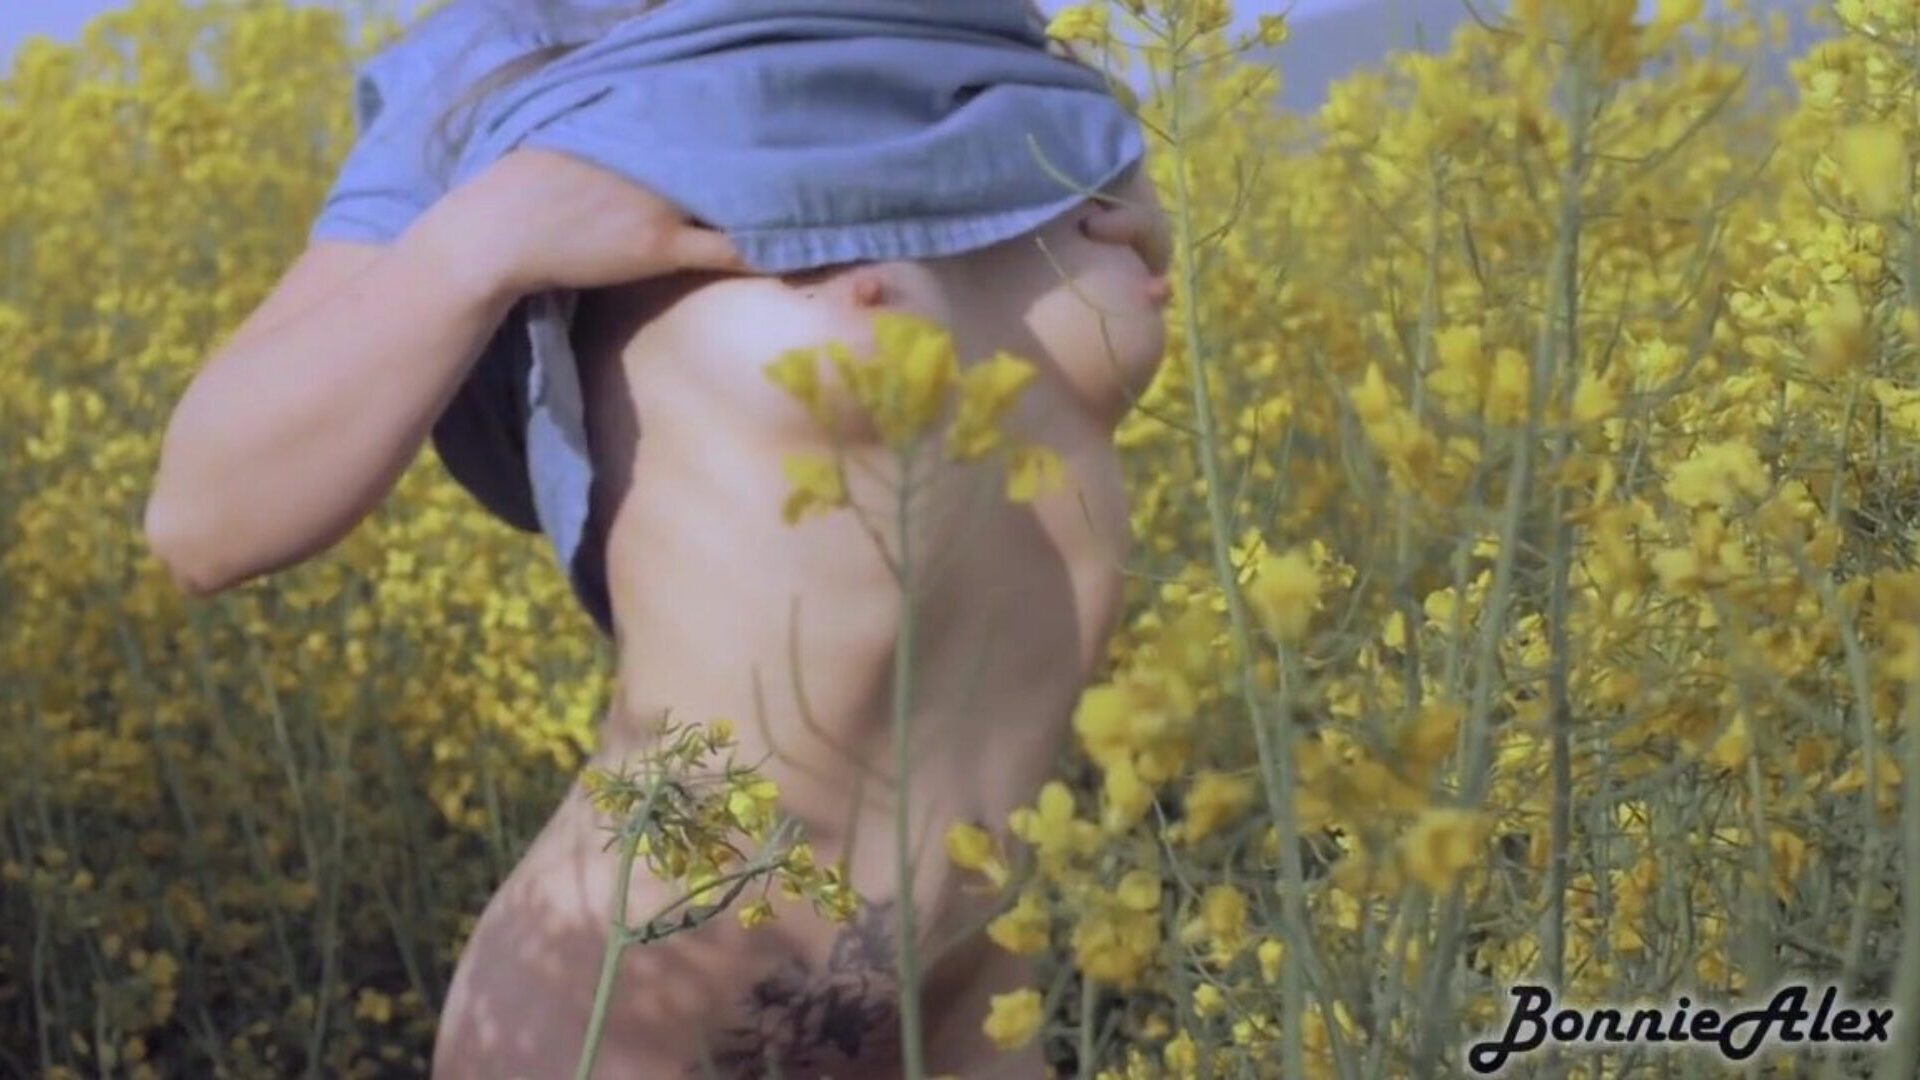 She only wants Nude Photos in a Flowering Field